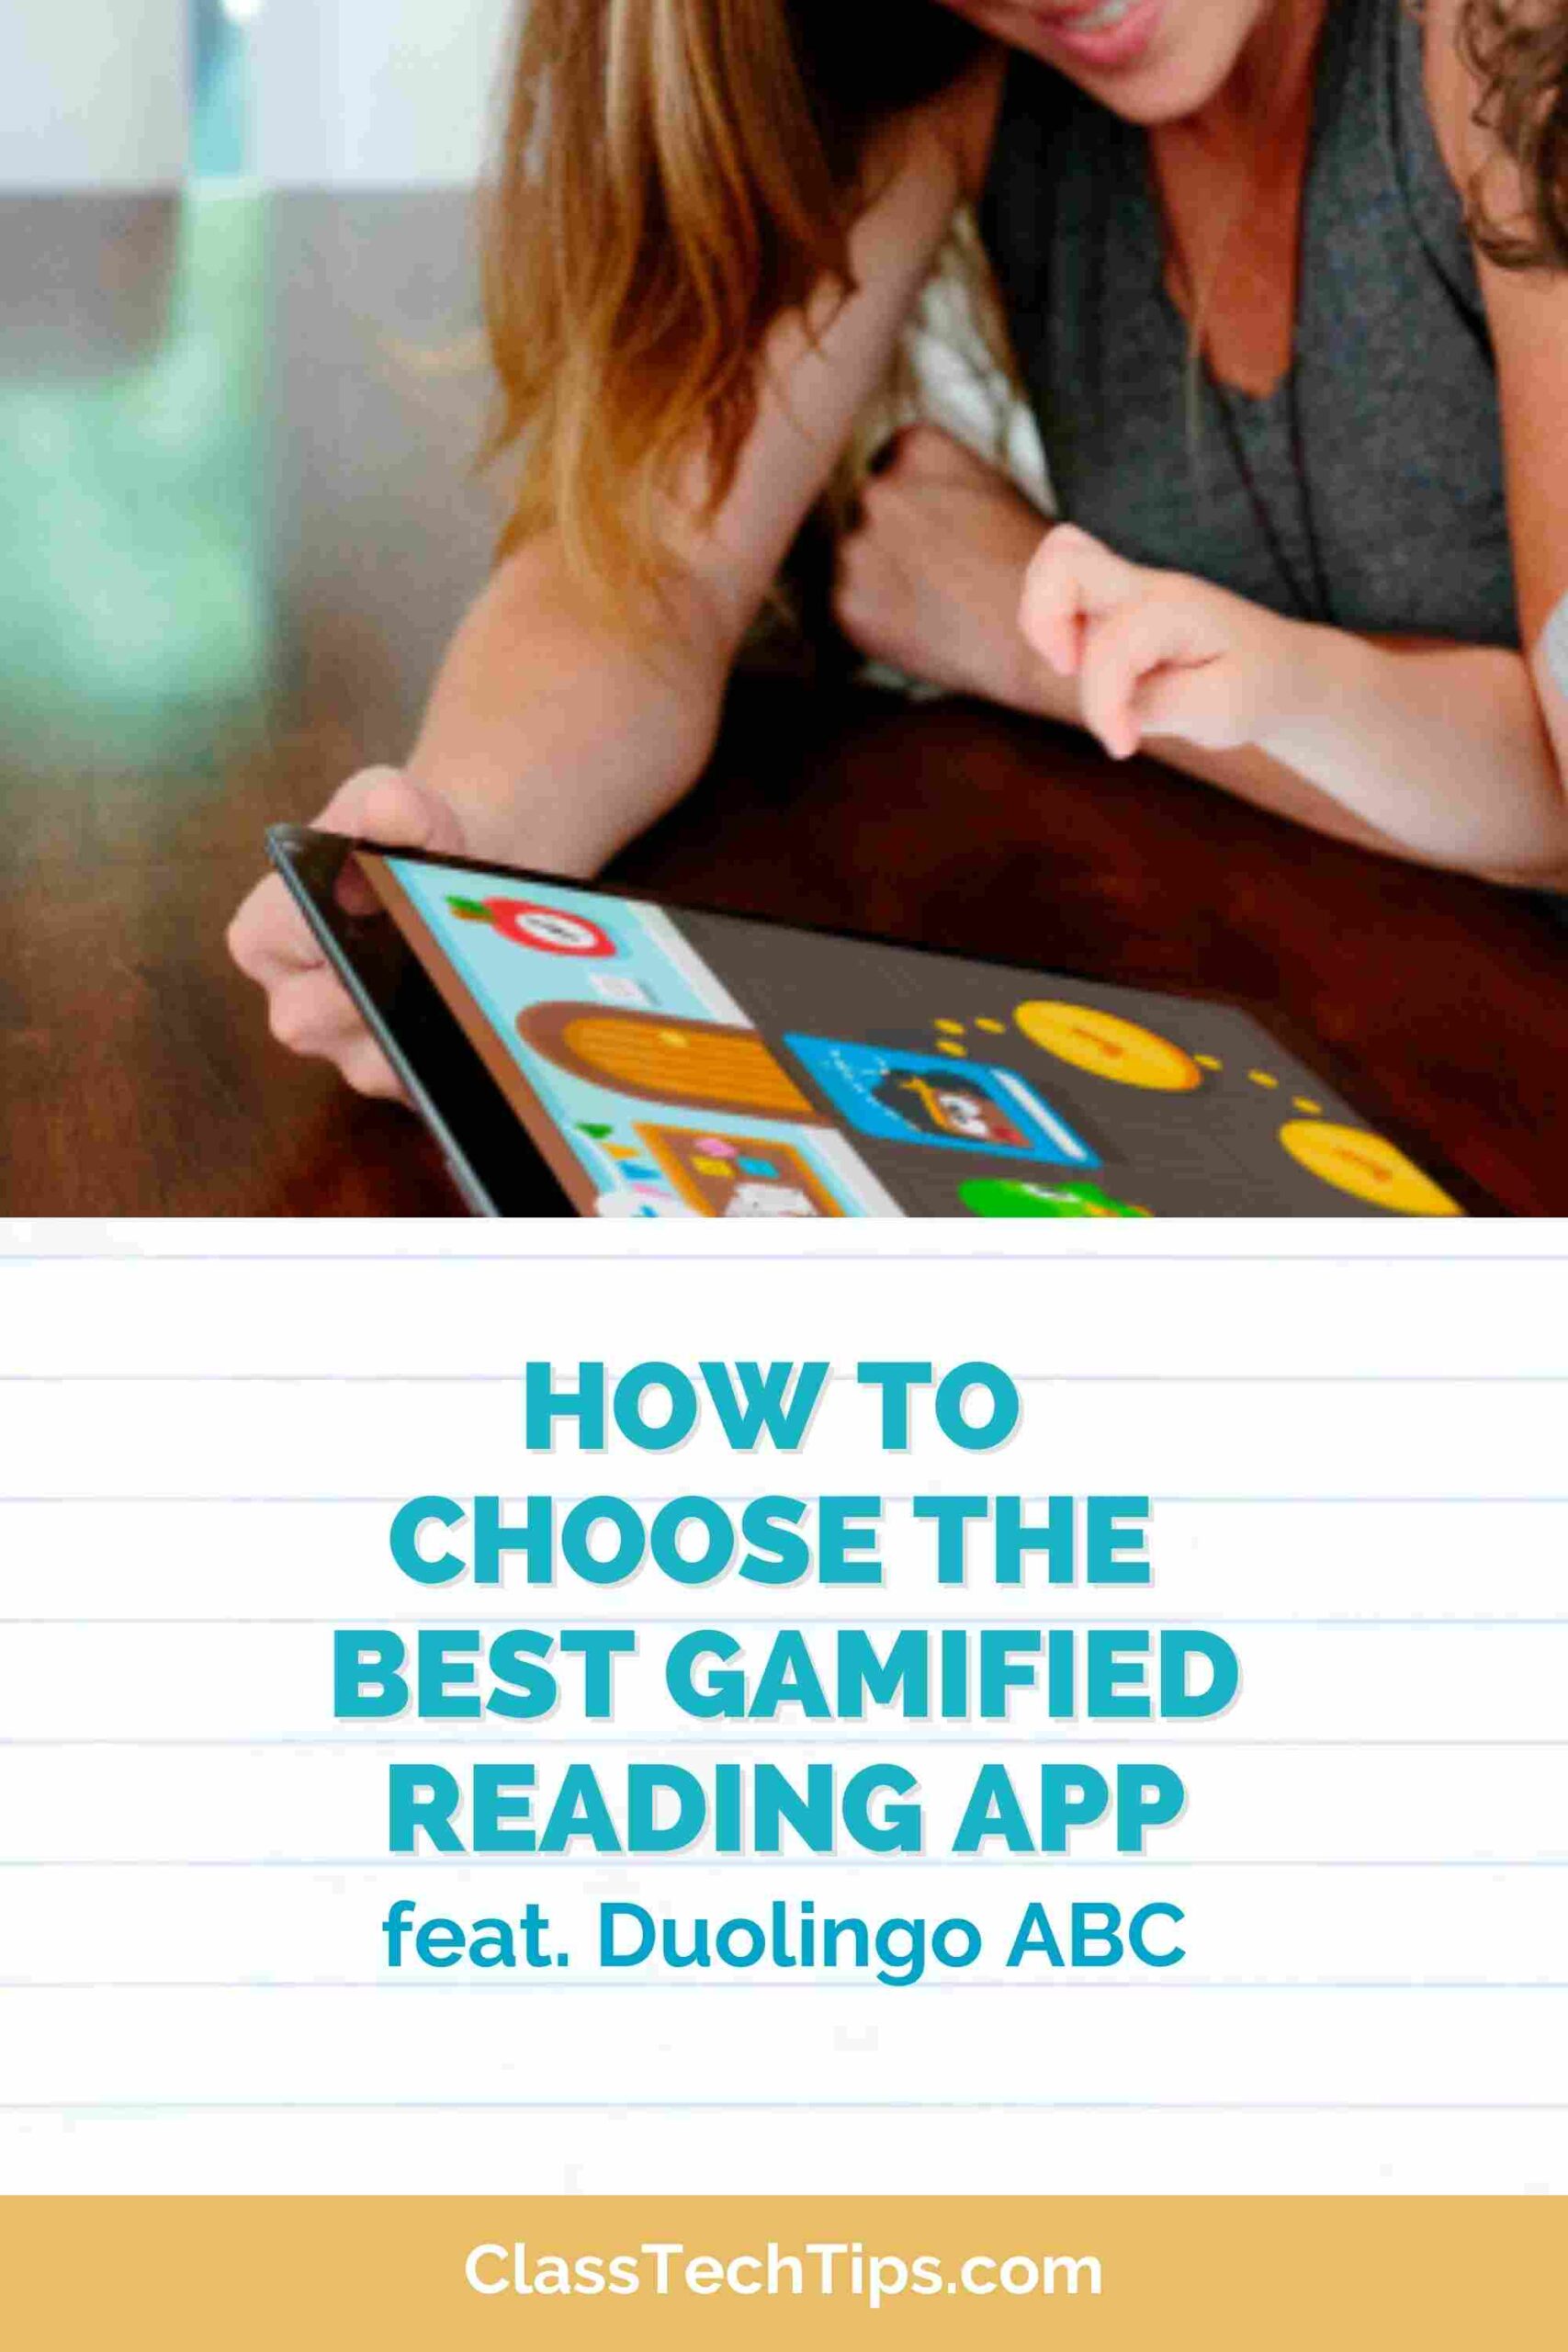 How to Choose the Best Gamified Reading App